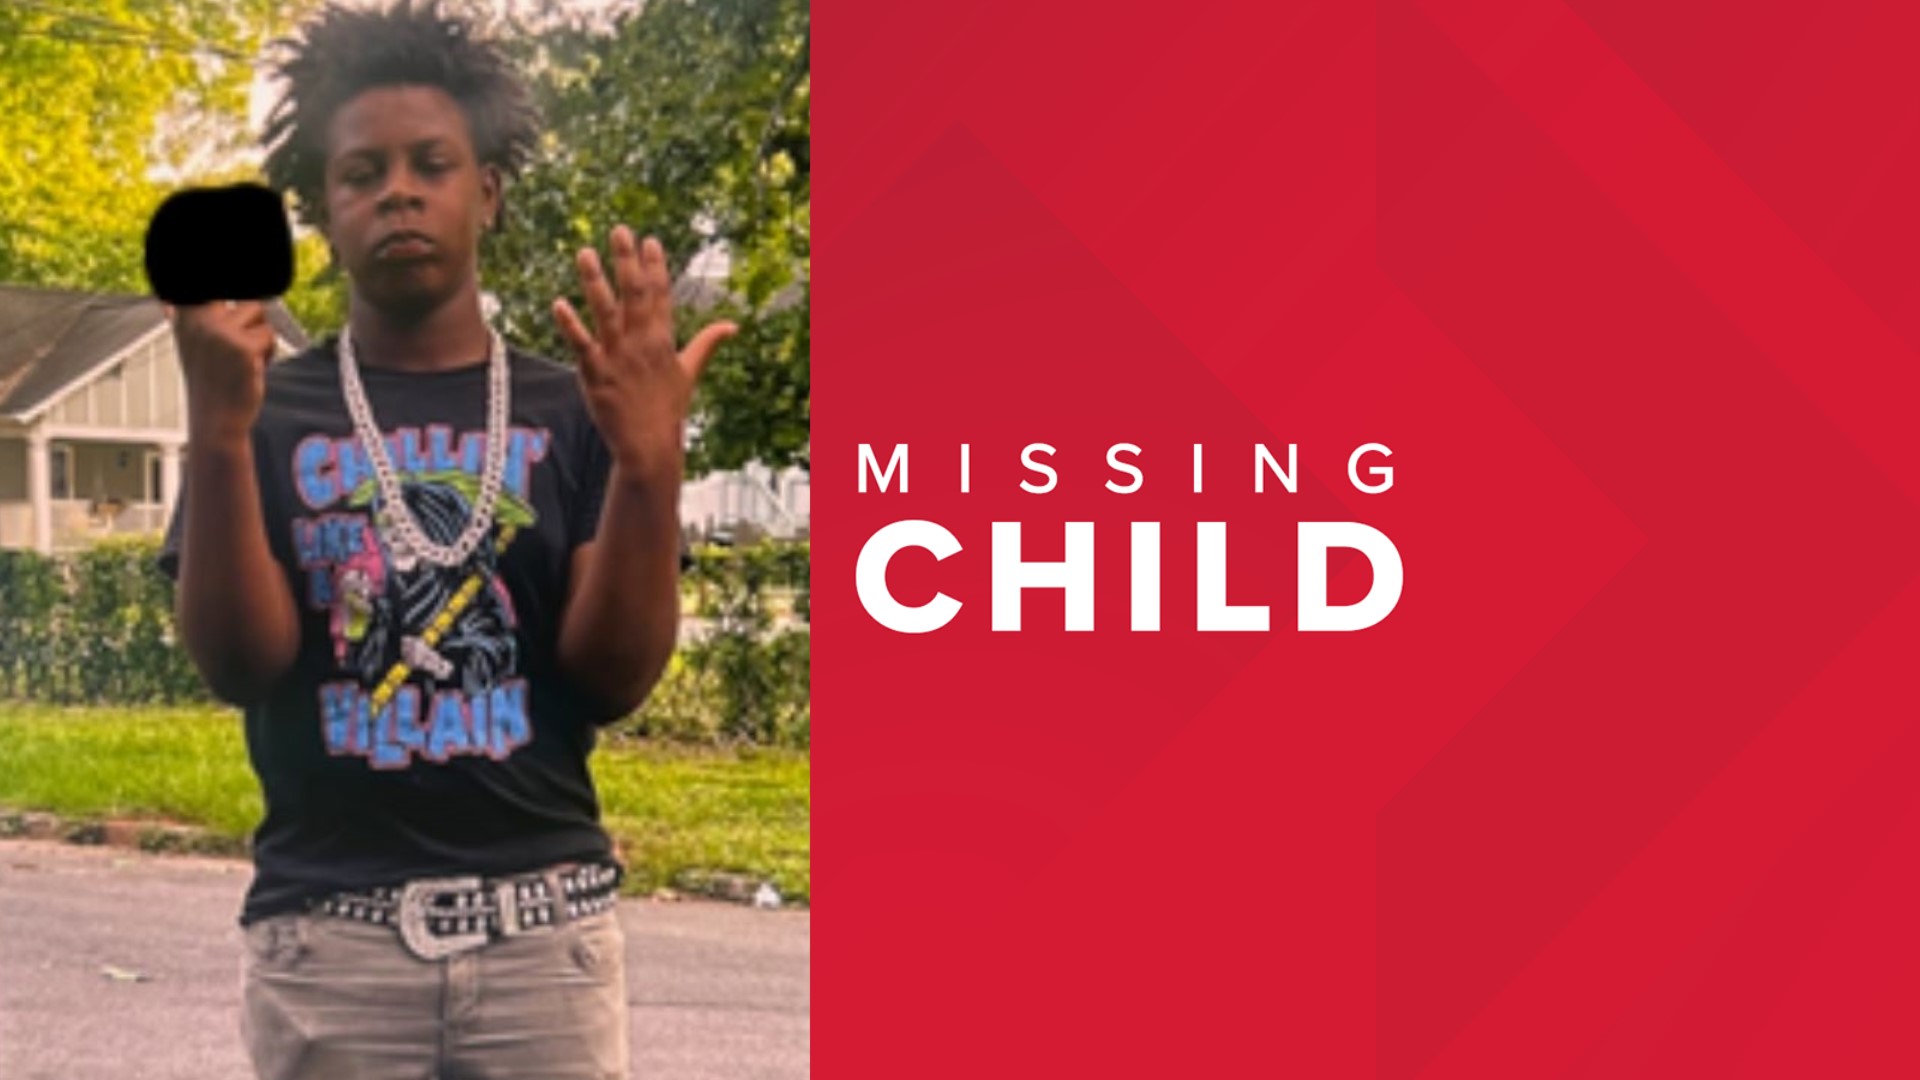 Christian Thomas was last seen at a home located at 846 Flat Shoals Way SE on Friday.